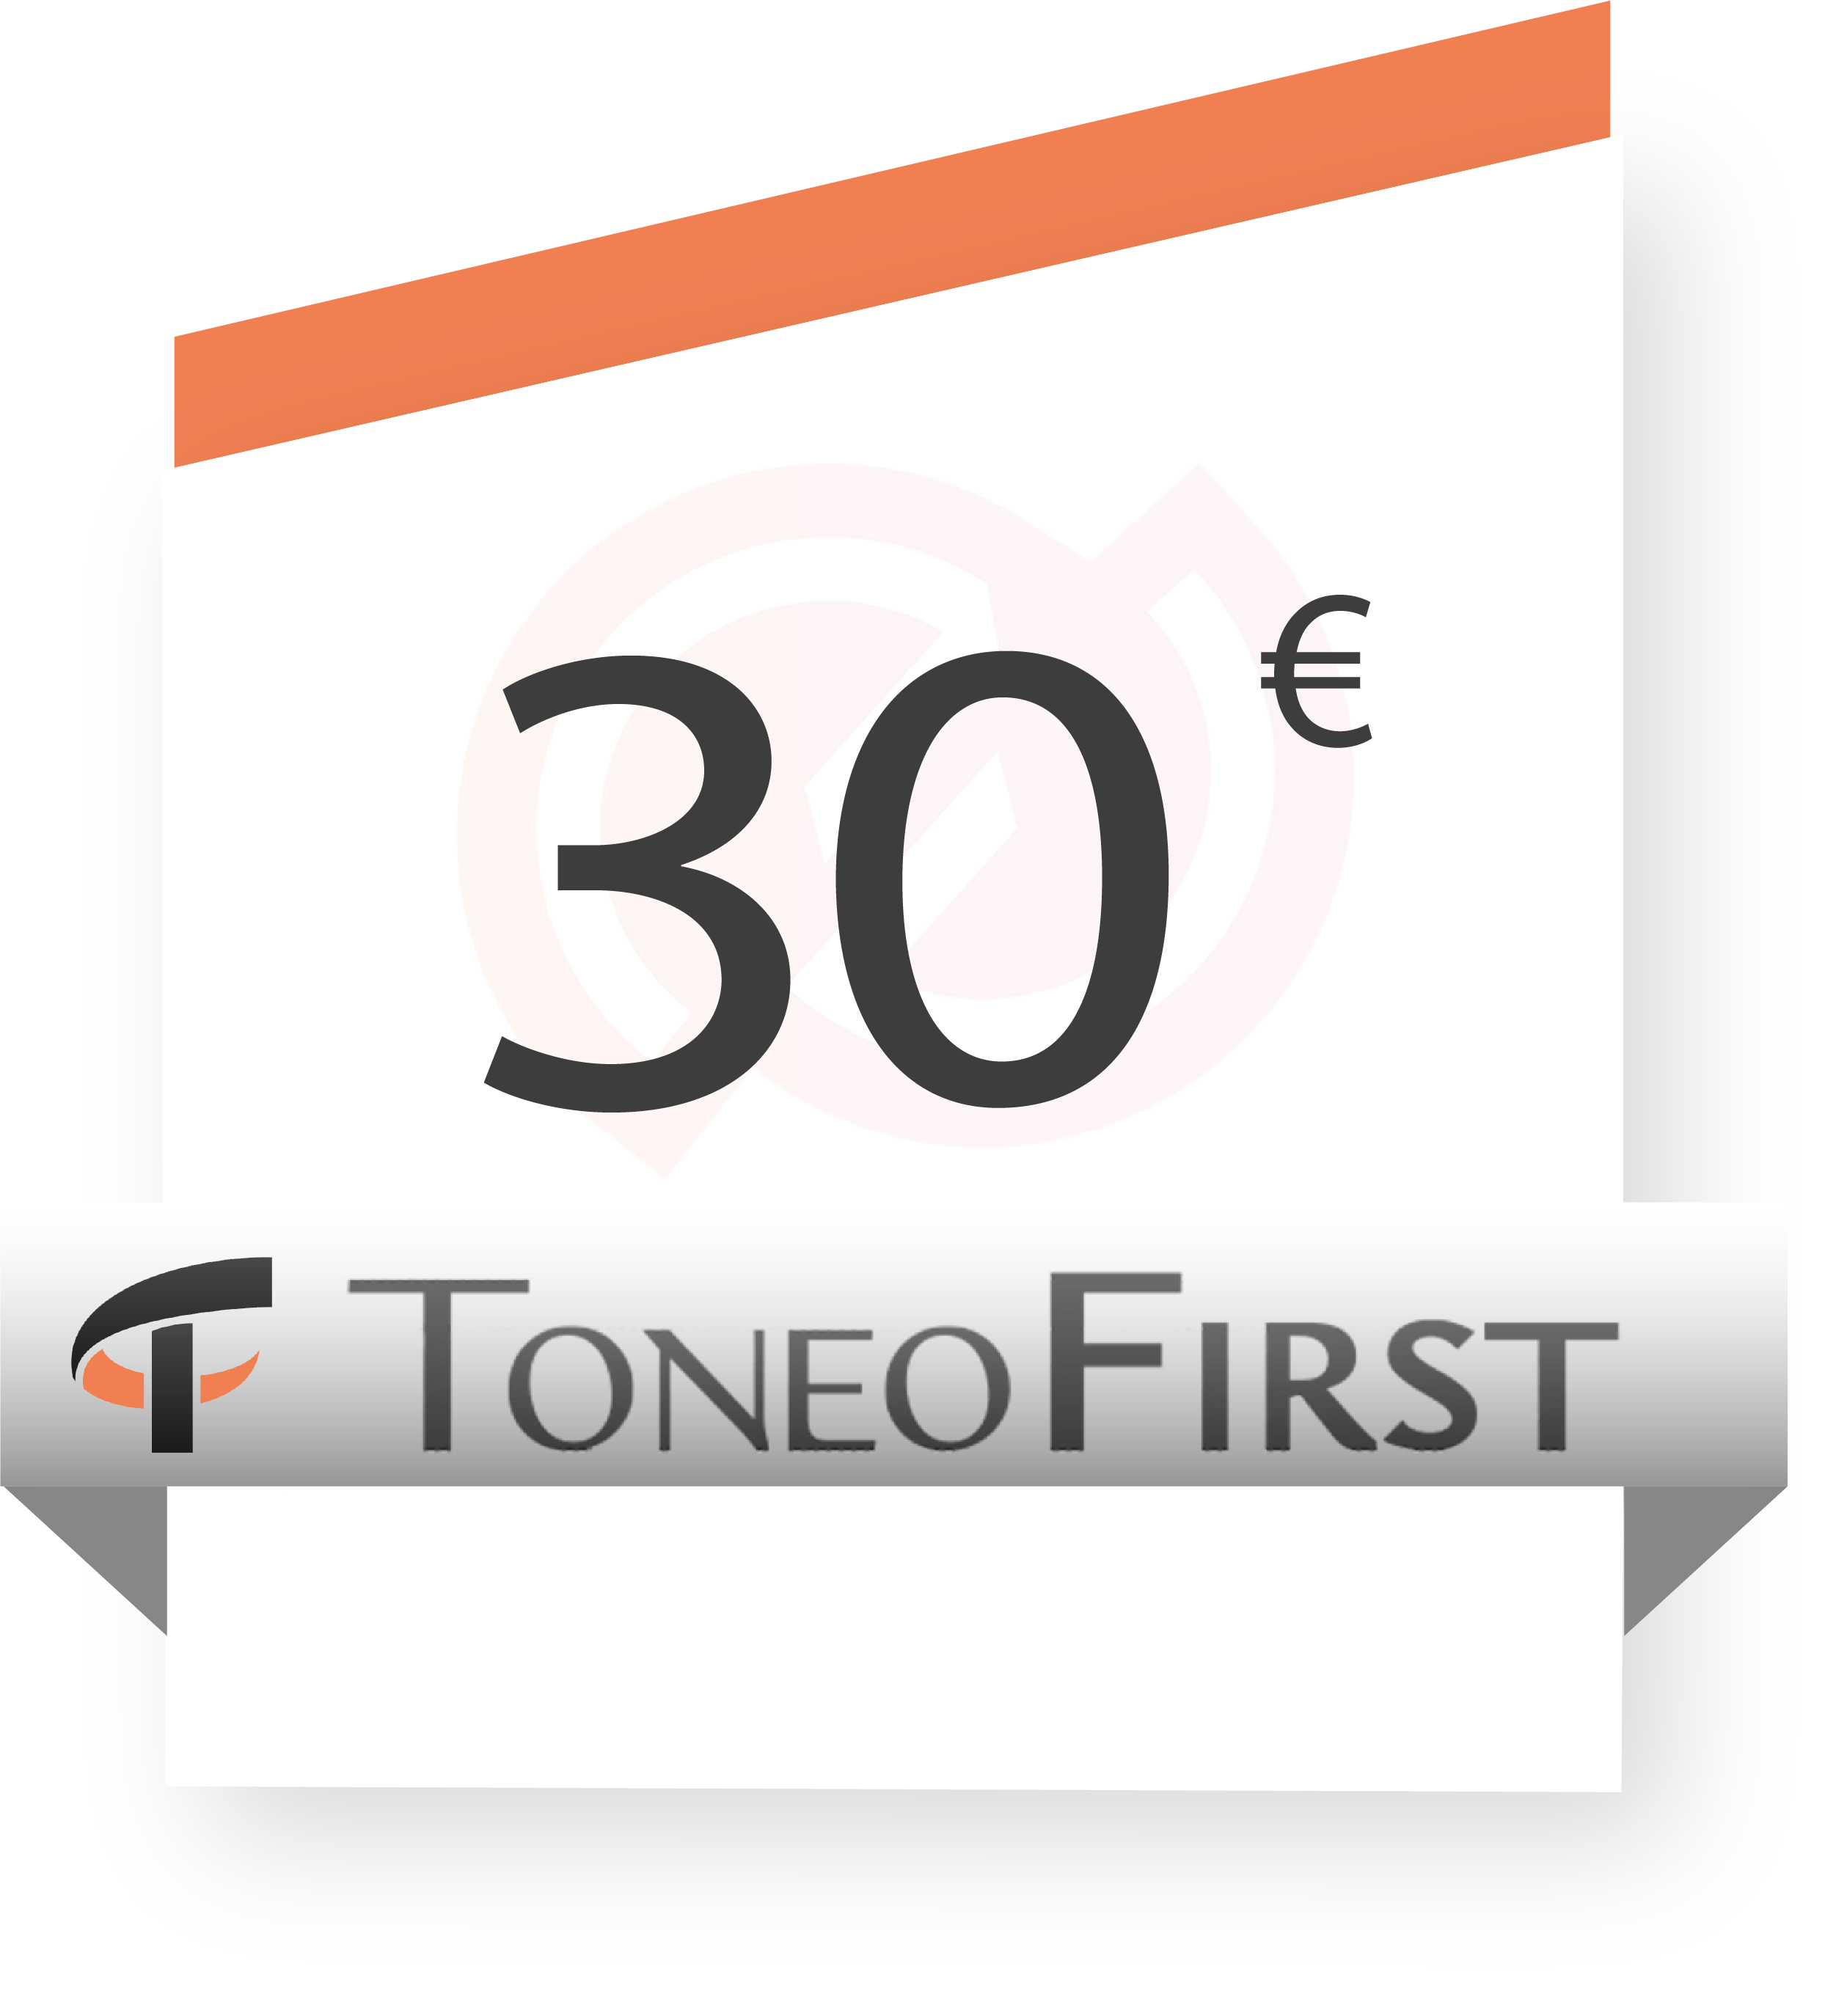 Toneo First 30€